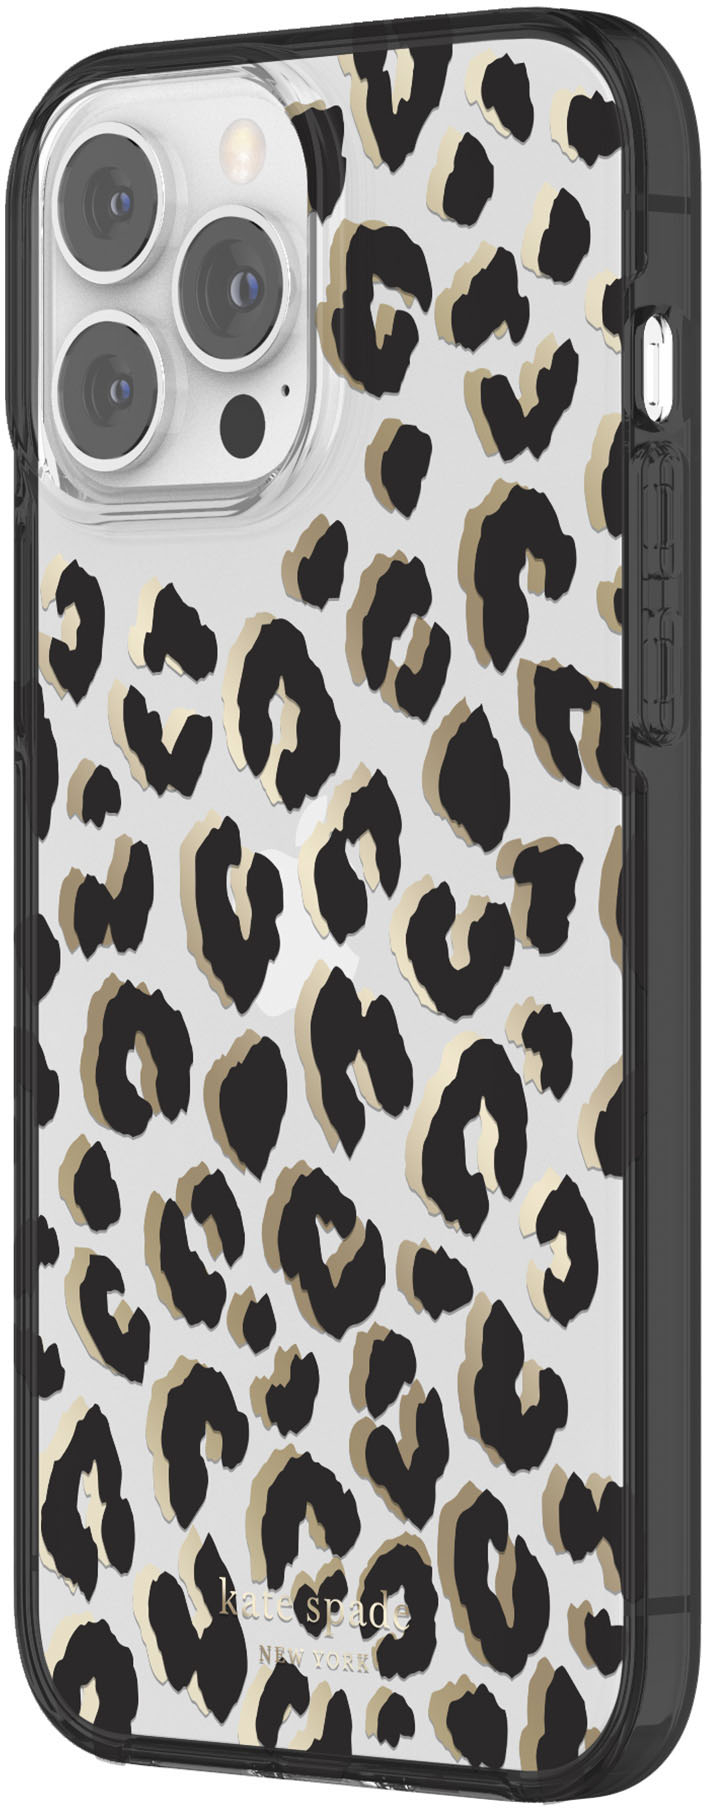 Angle View: kate spade new york - Protective Hardshell Case for iPhone 13/12 Pro Max - Leopard